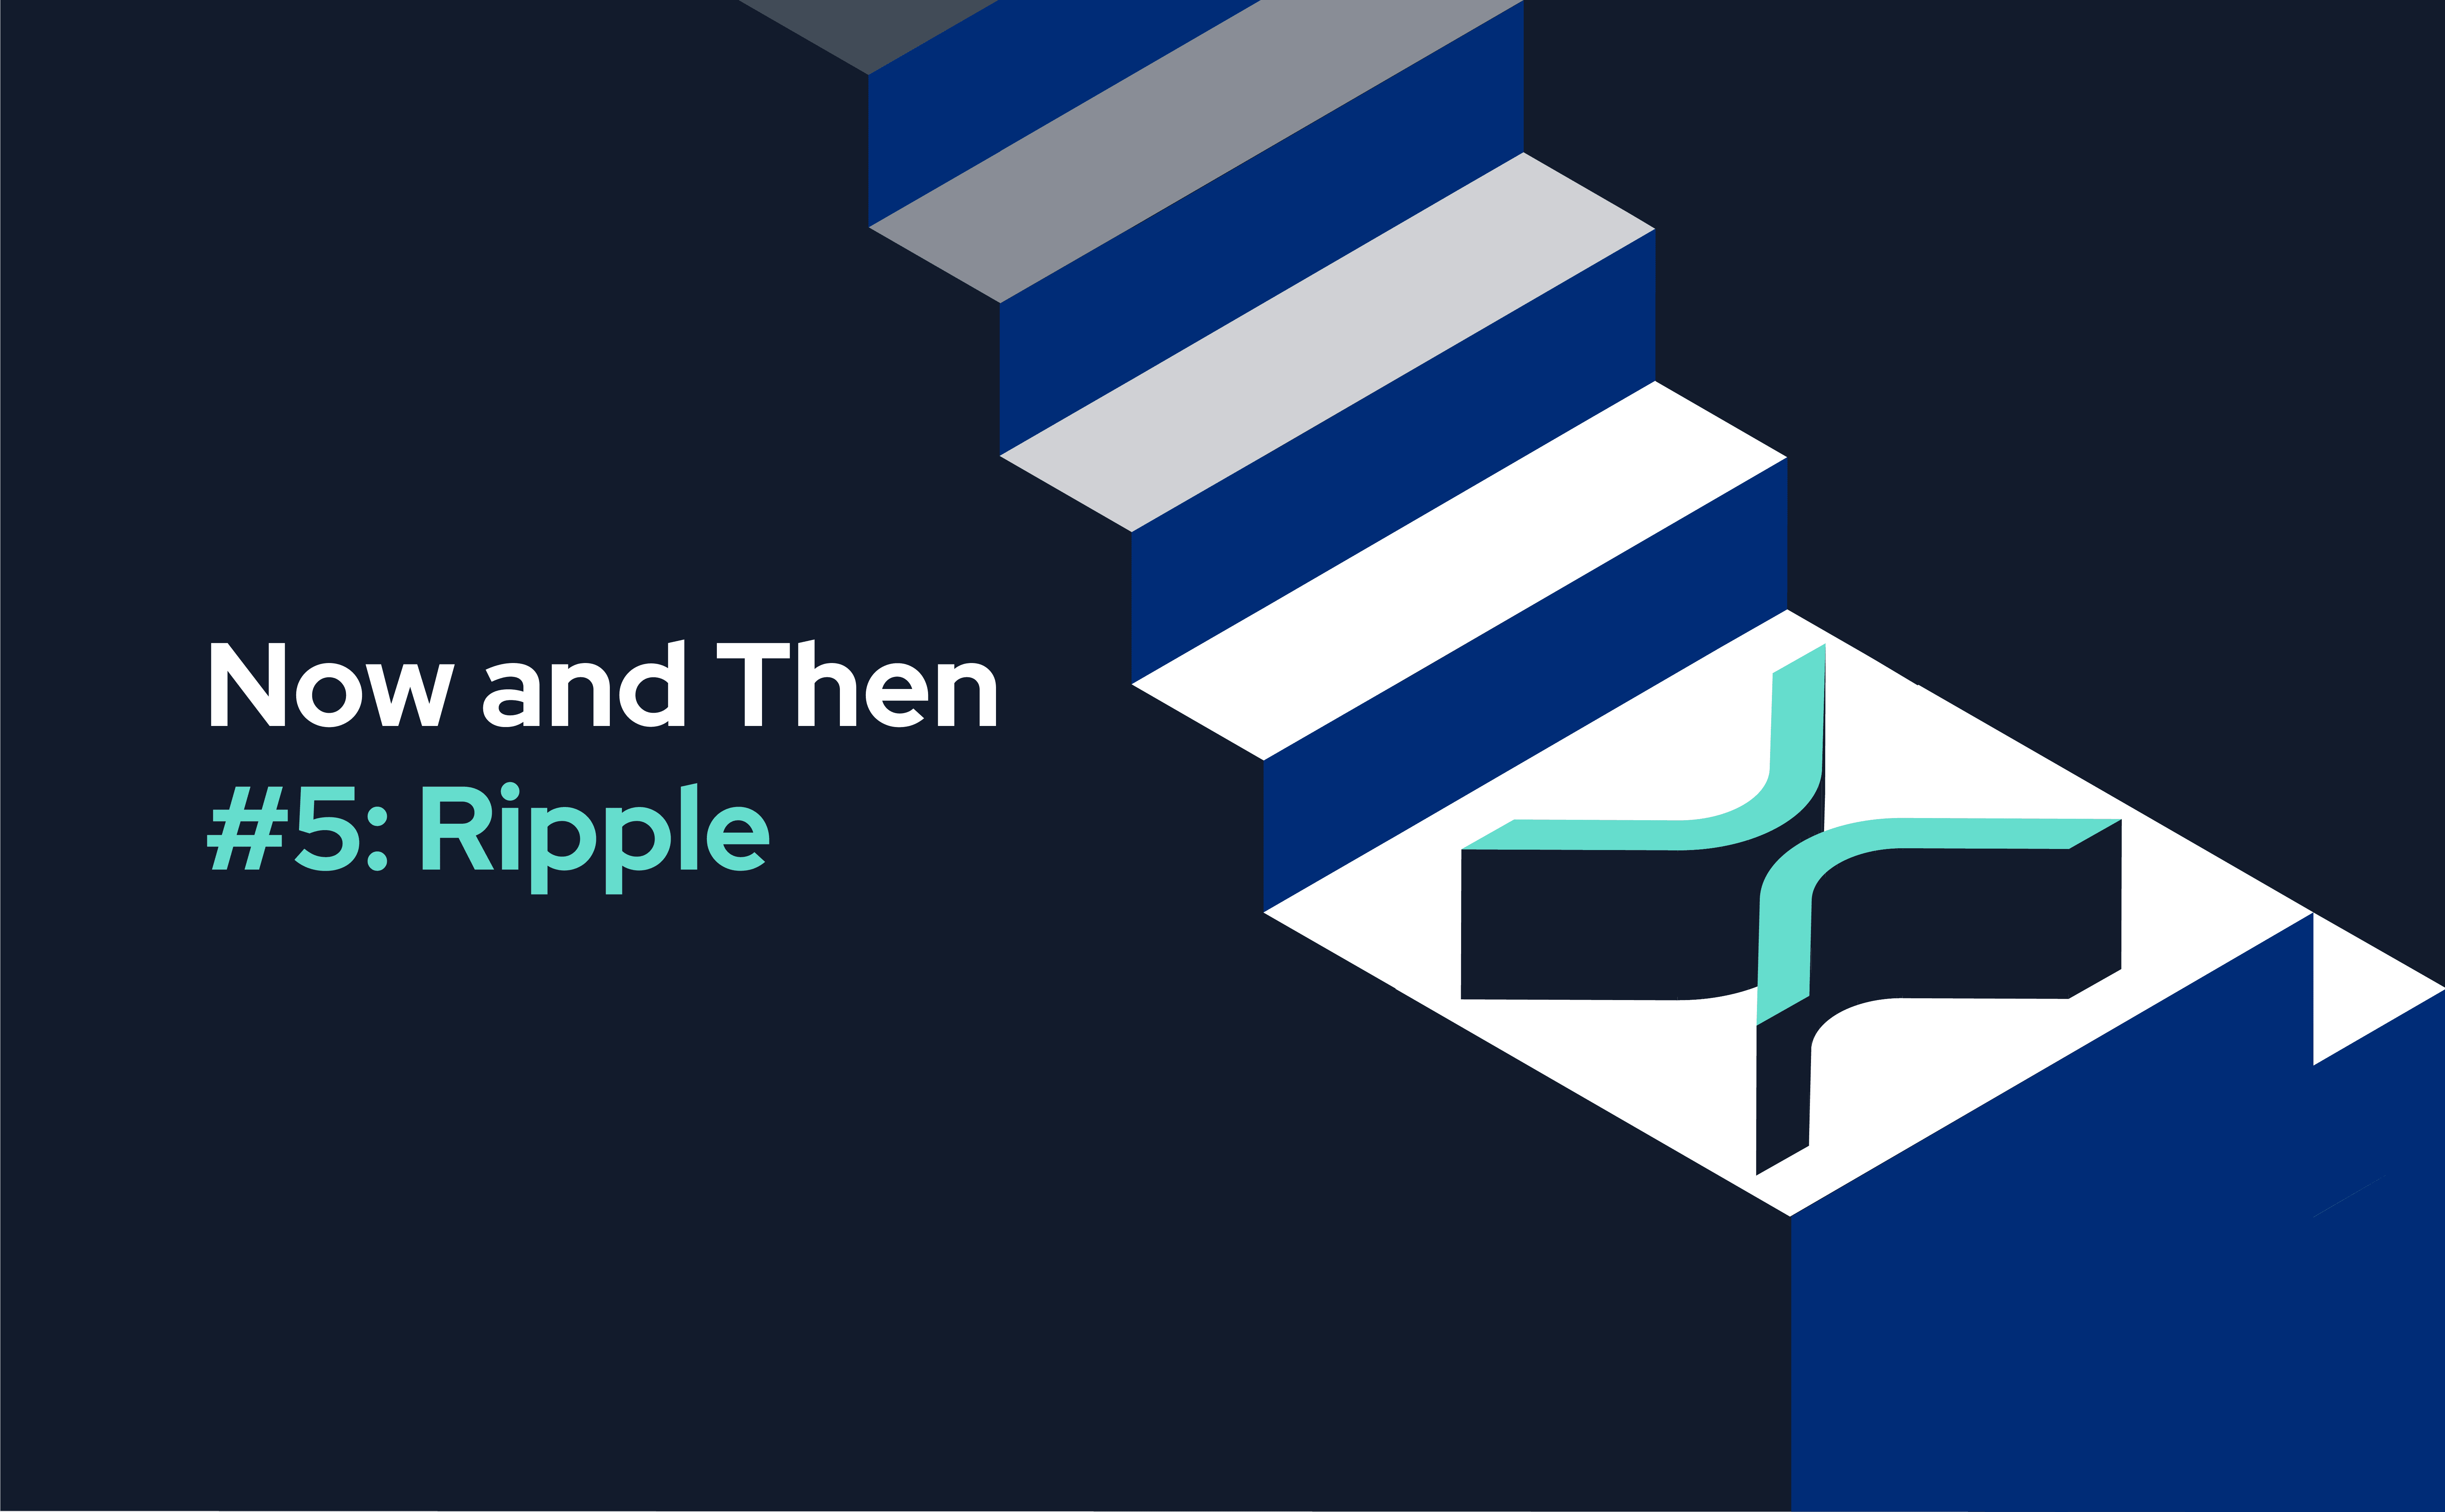 Ripple (XRP) has evolved since 2012